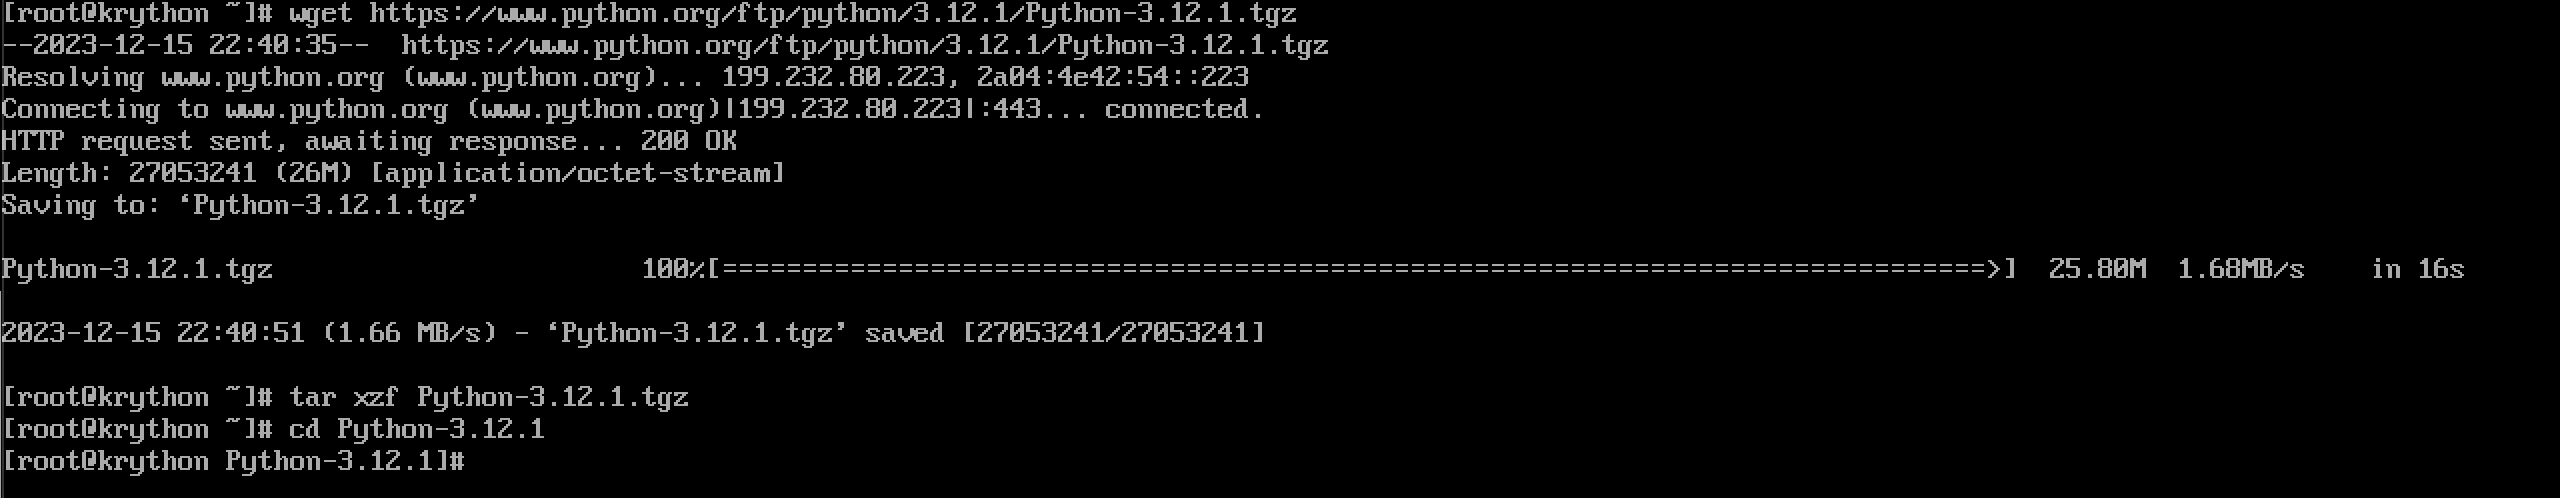 How to Install Python 3.12 on AlmaLinux